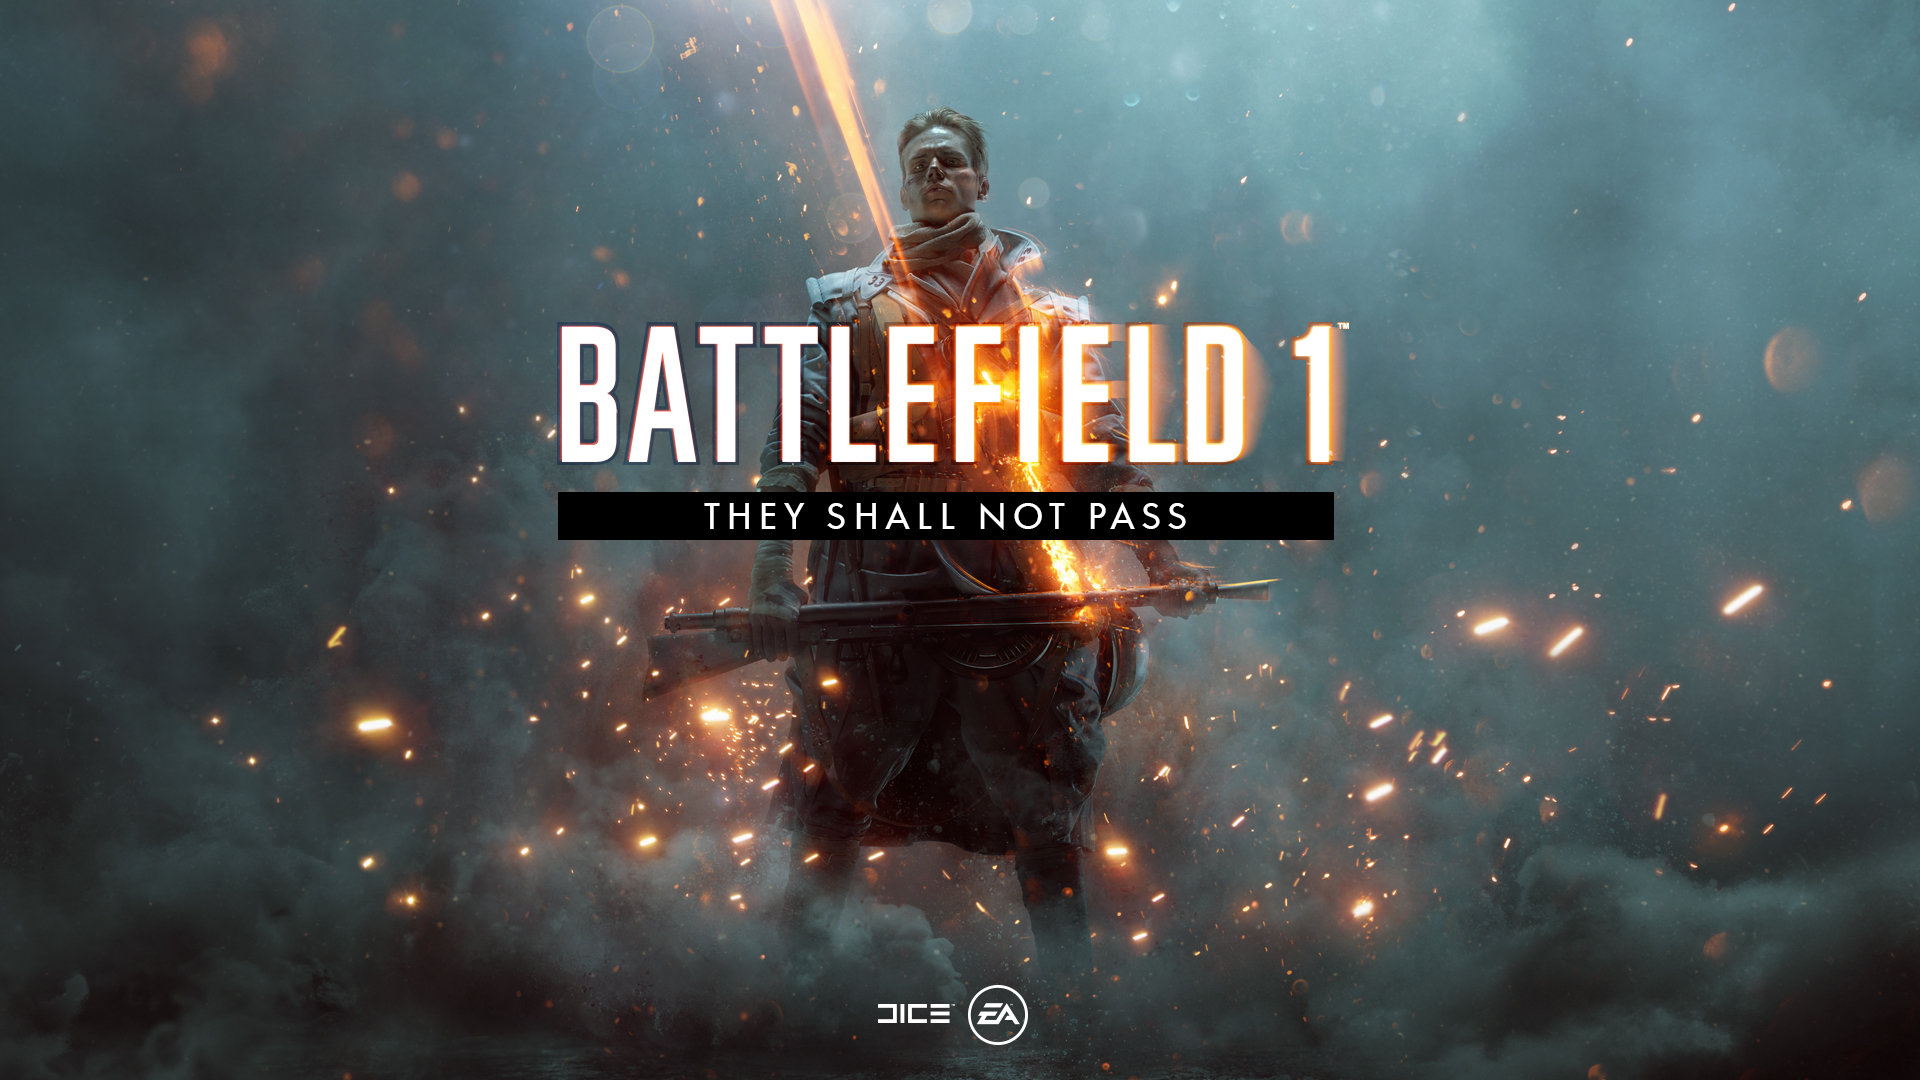 Battefield 1 : They Shall Not Pass